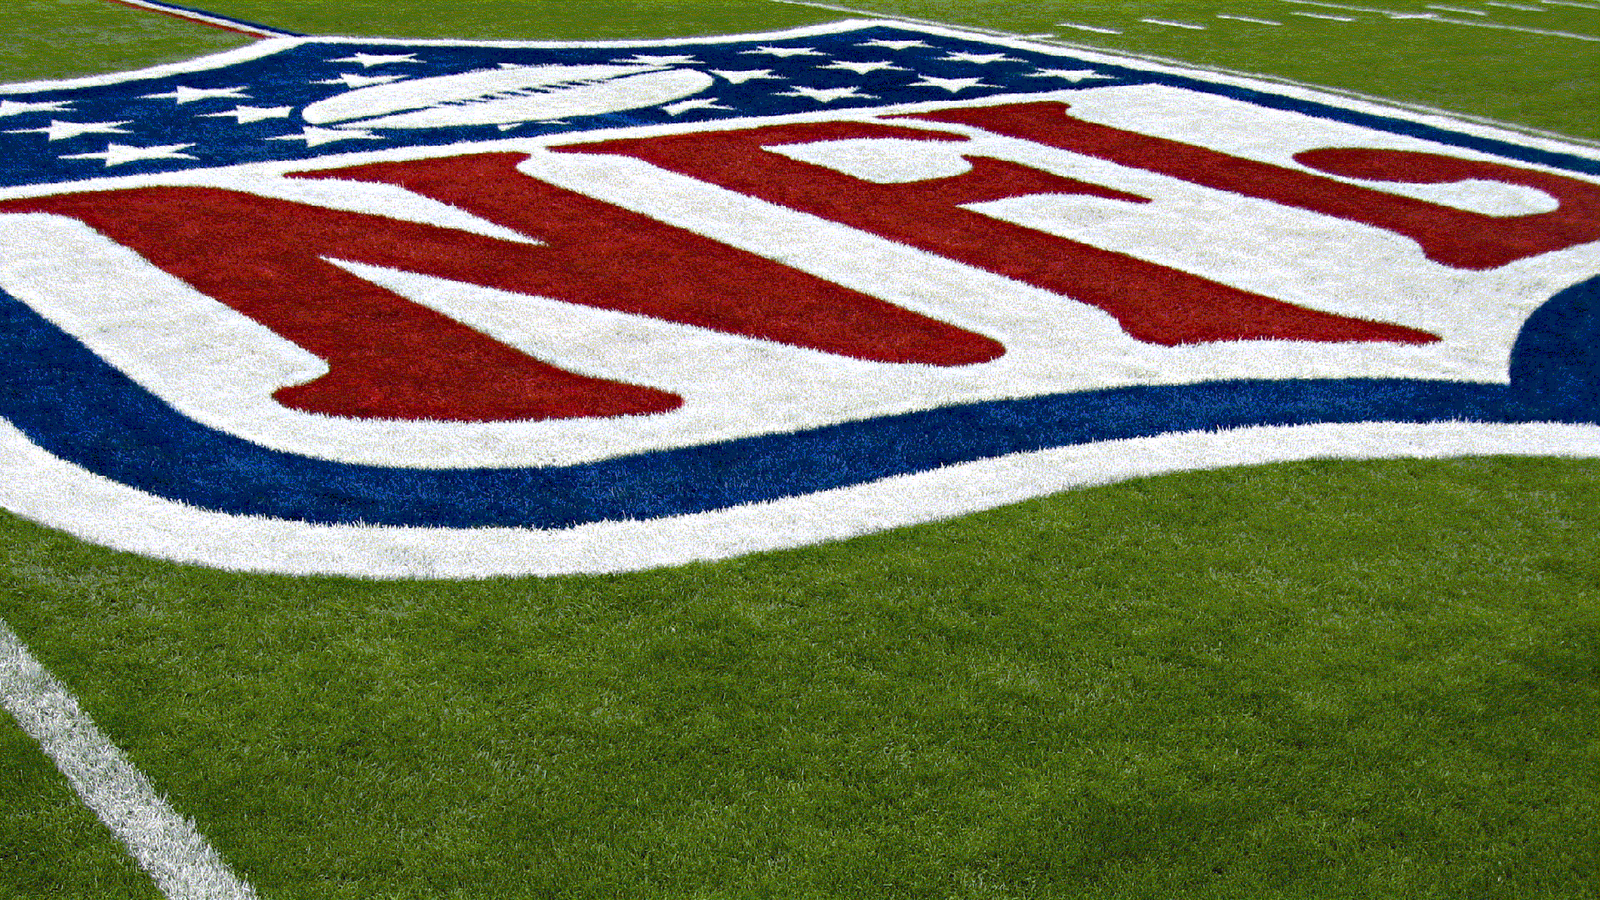 NFL 2012   Free Download NFL Football HD Wallpapers for iPad and Nexus